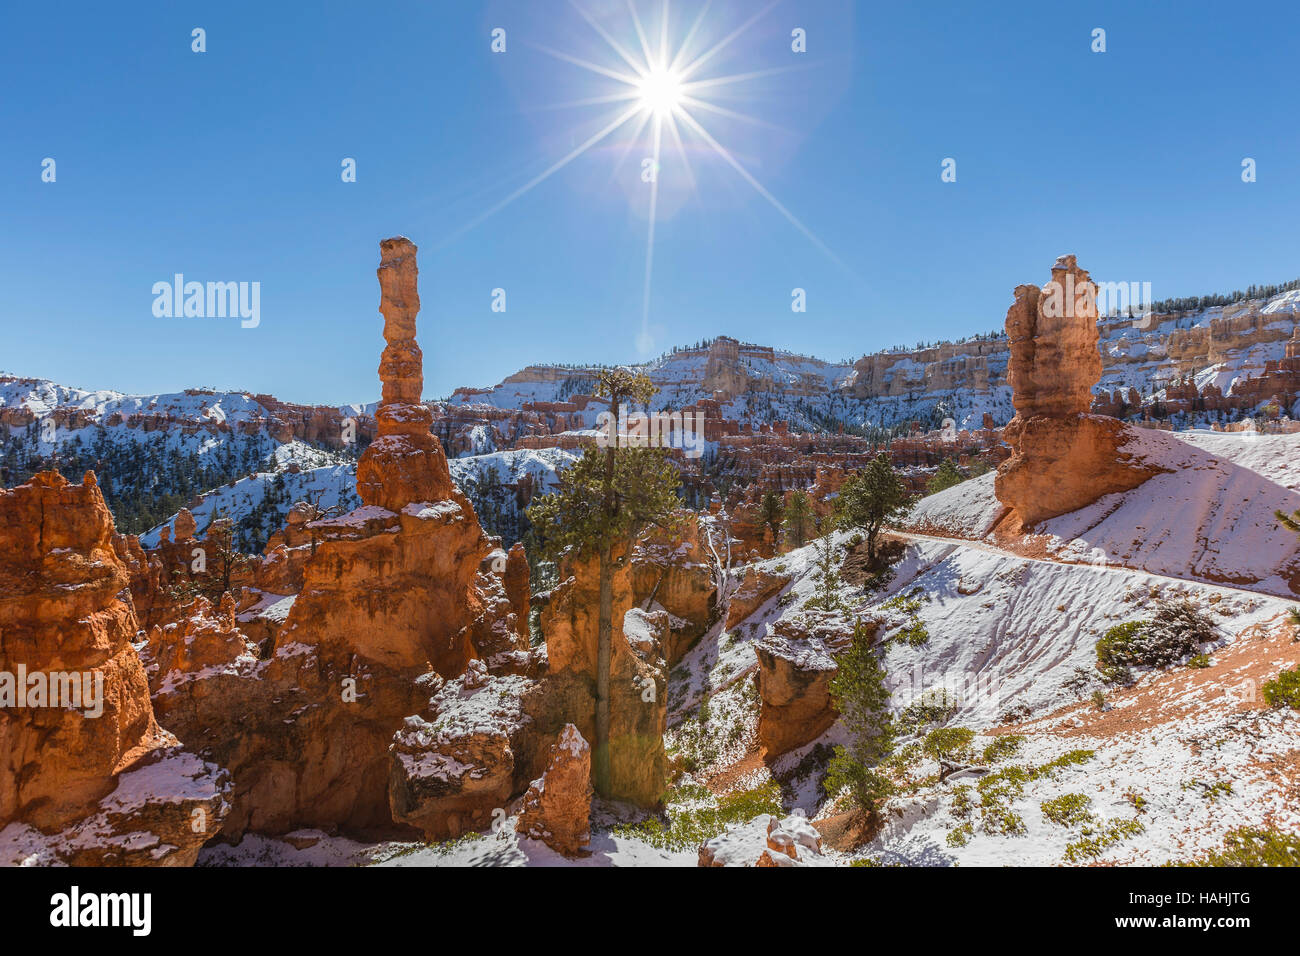 Winter morning in the Hoodoos at Bryce Canyon National Park in Southern Utah. Stock Photo